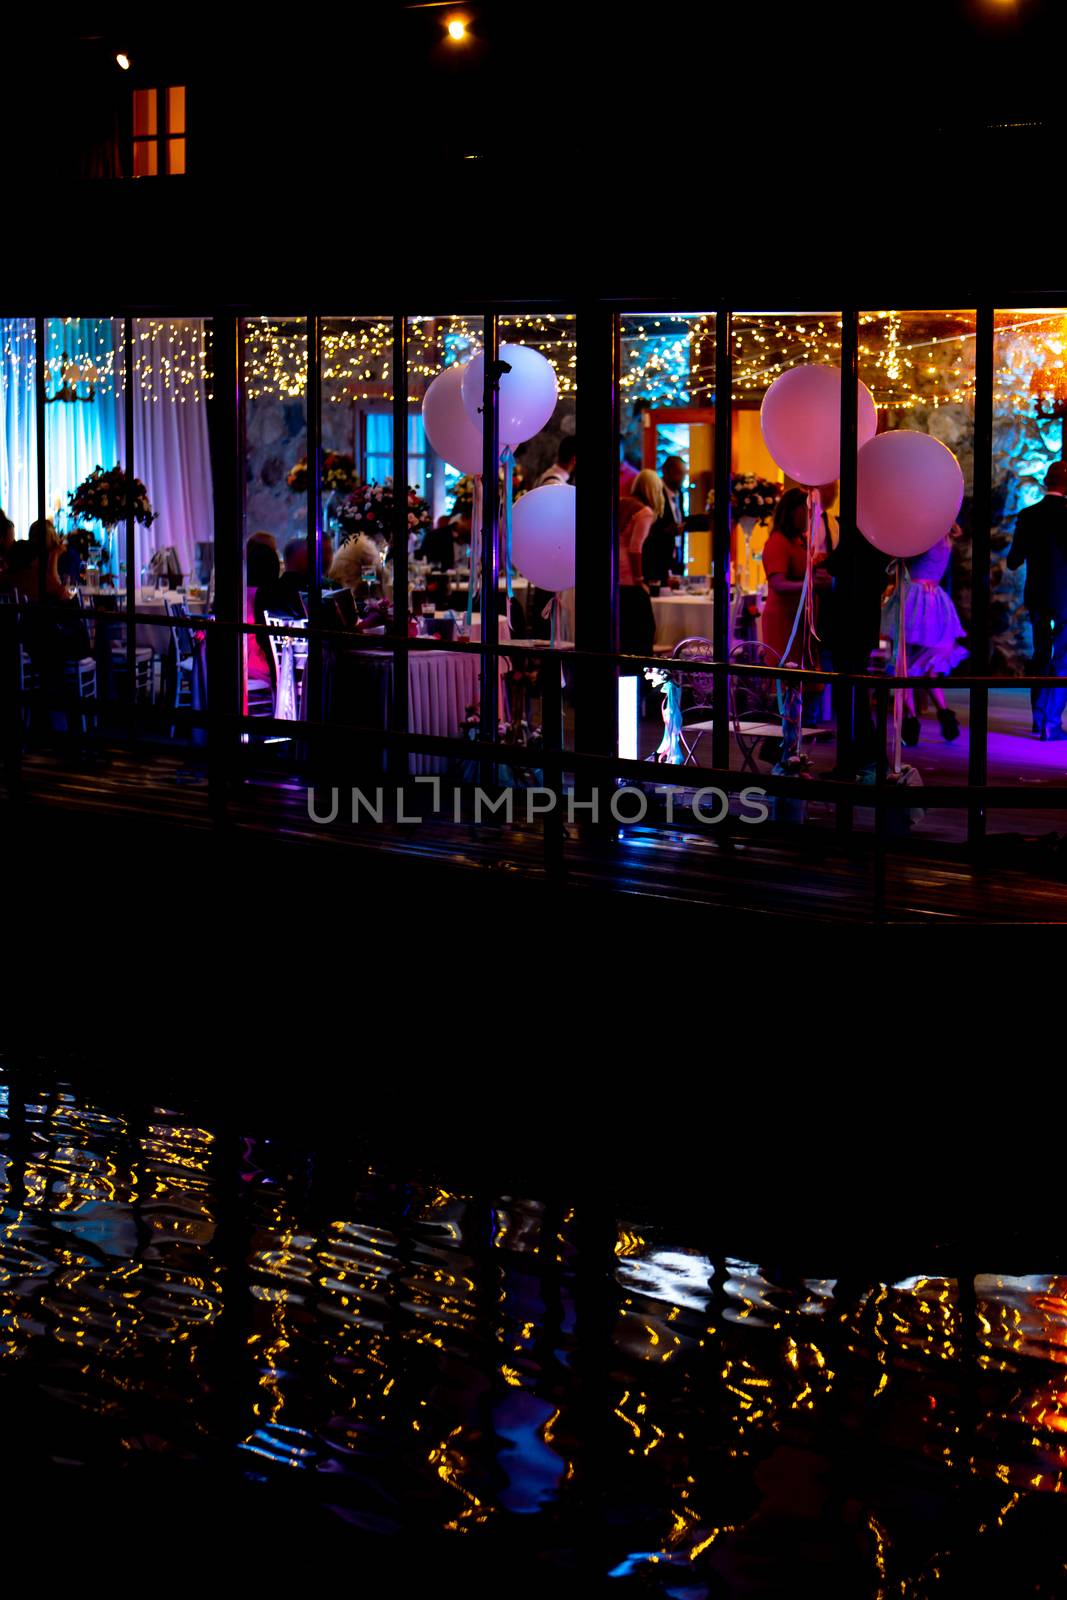 Silhouettes of people in the window during wedding celebrations at night, in the light of colorful spotlights.